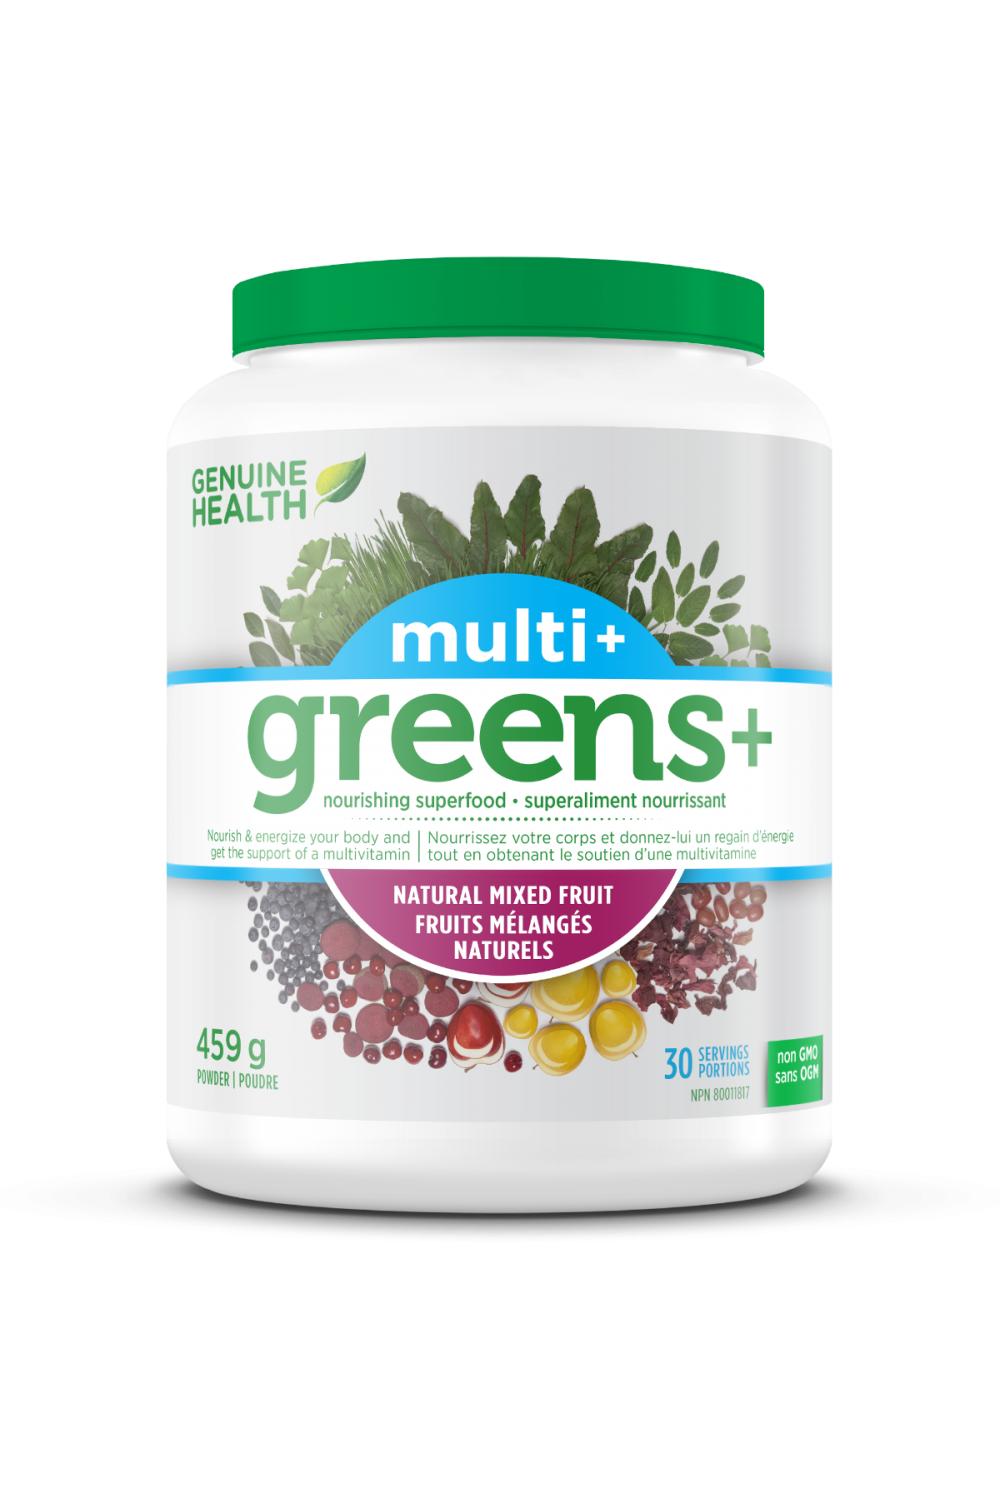 Genuine Health Greens+ Multi+ - Natural Mixed Fruit Flavour 459g